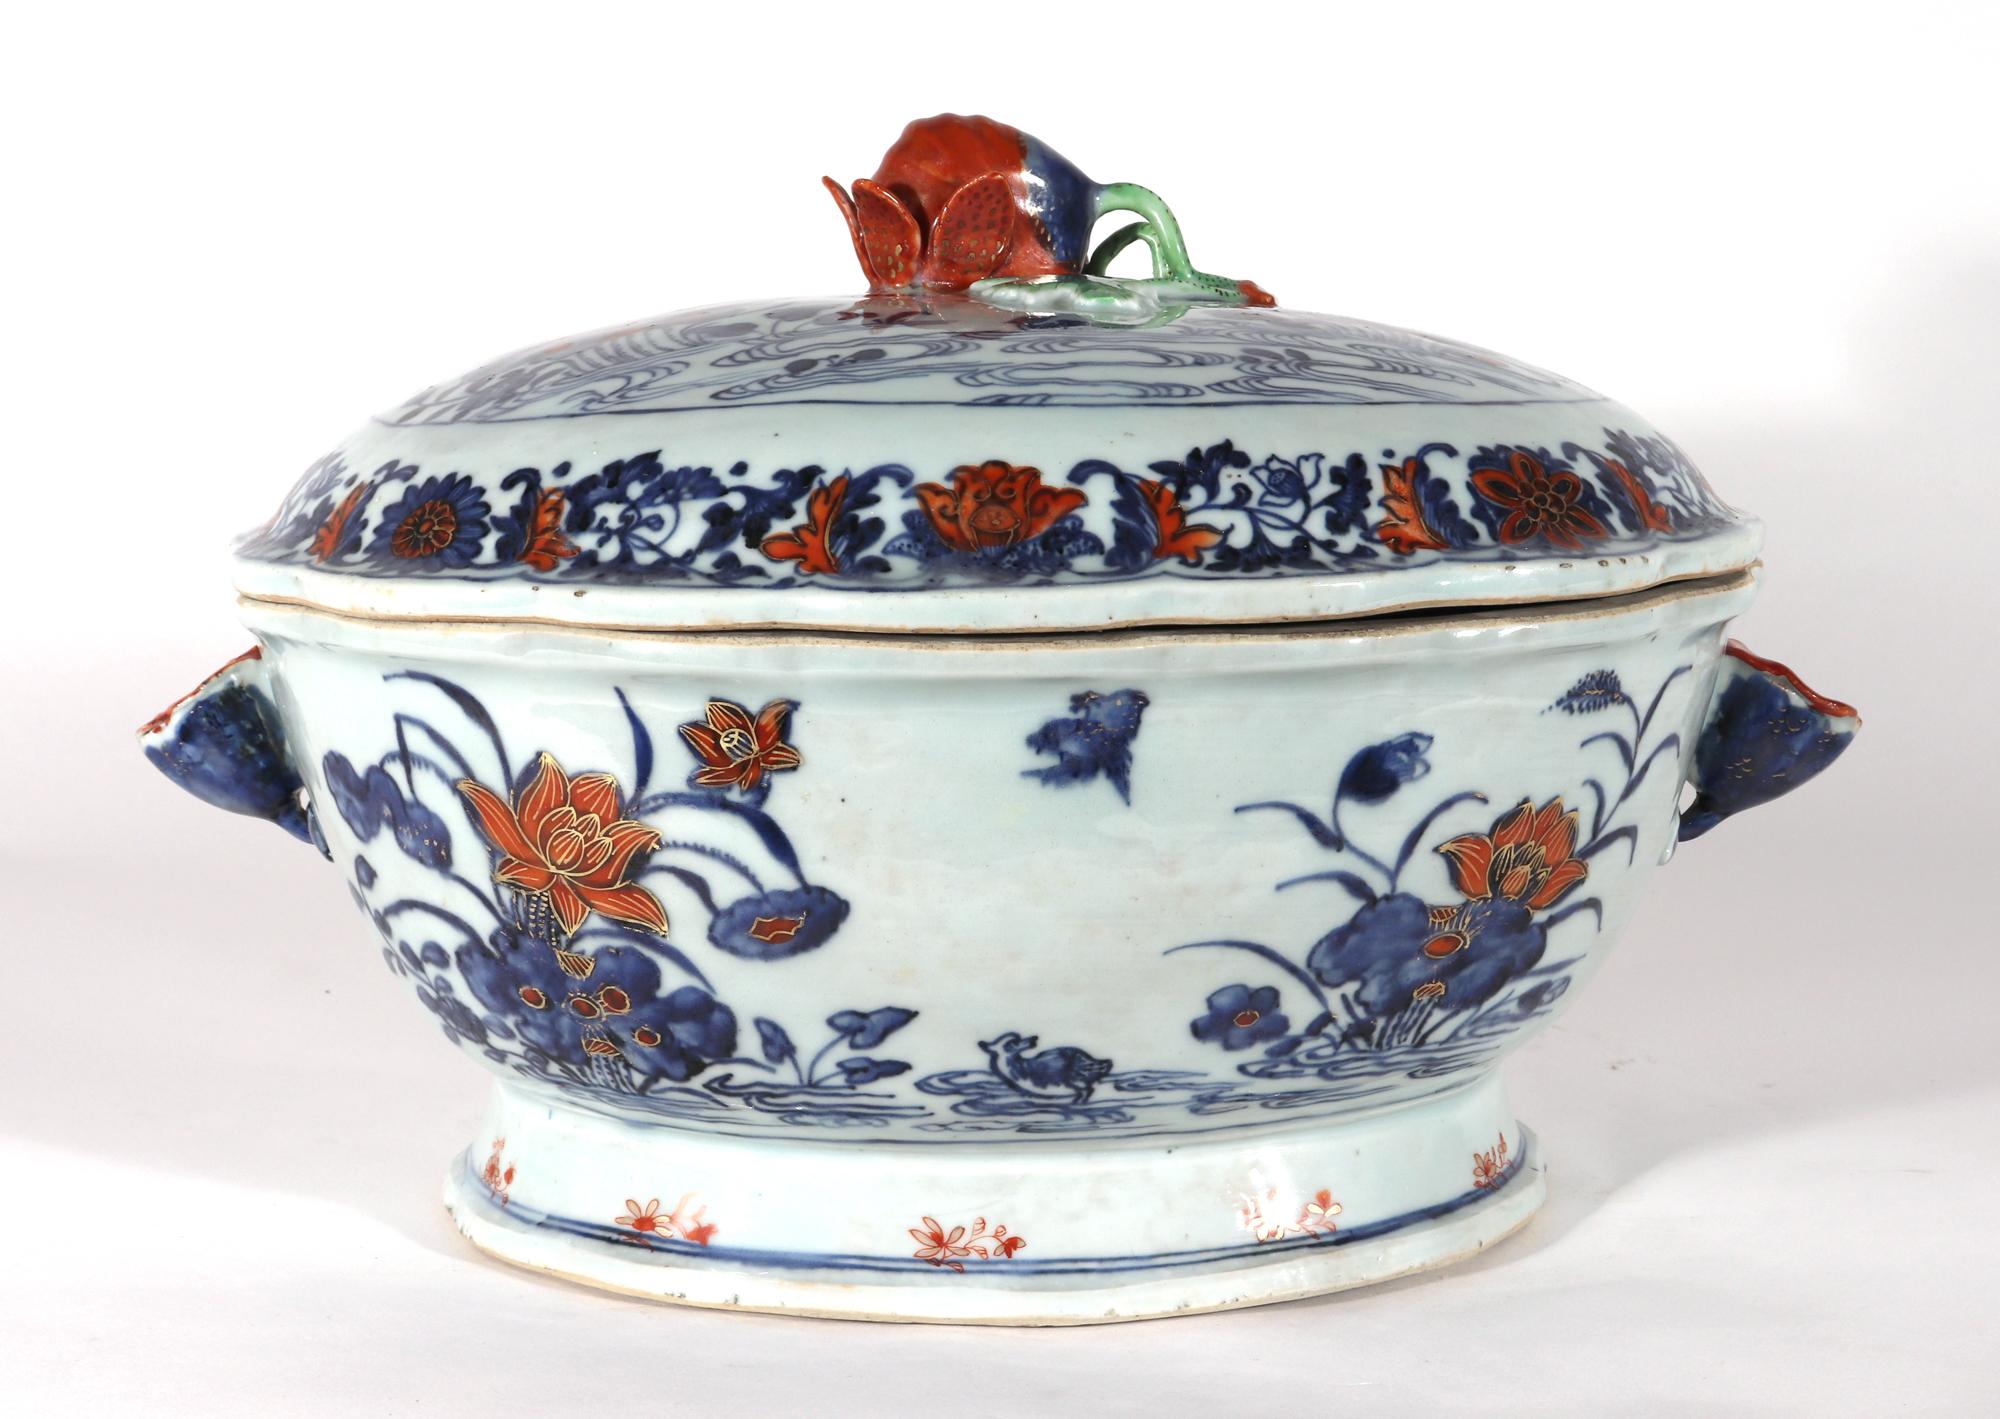 18th Century Chinese Export Porcelain Imari Tureen and Cover-Duck in Pond For Sale 2